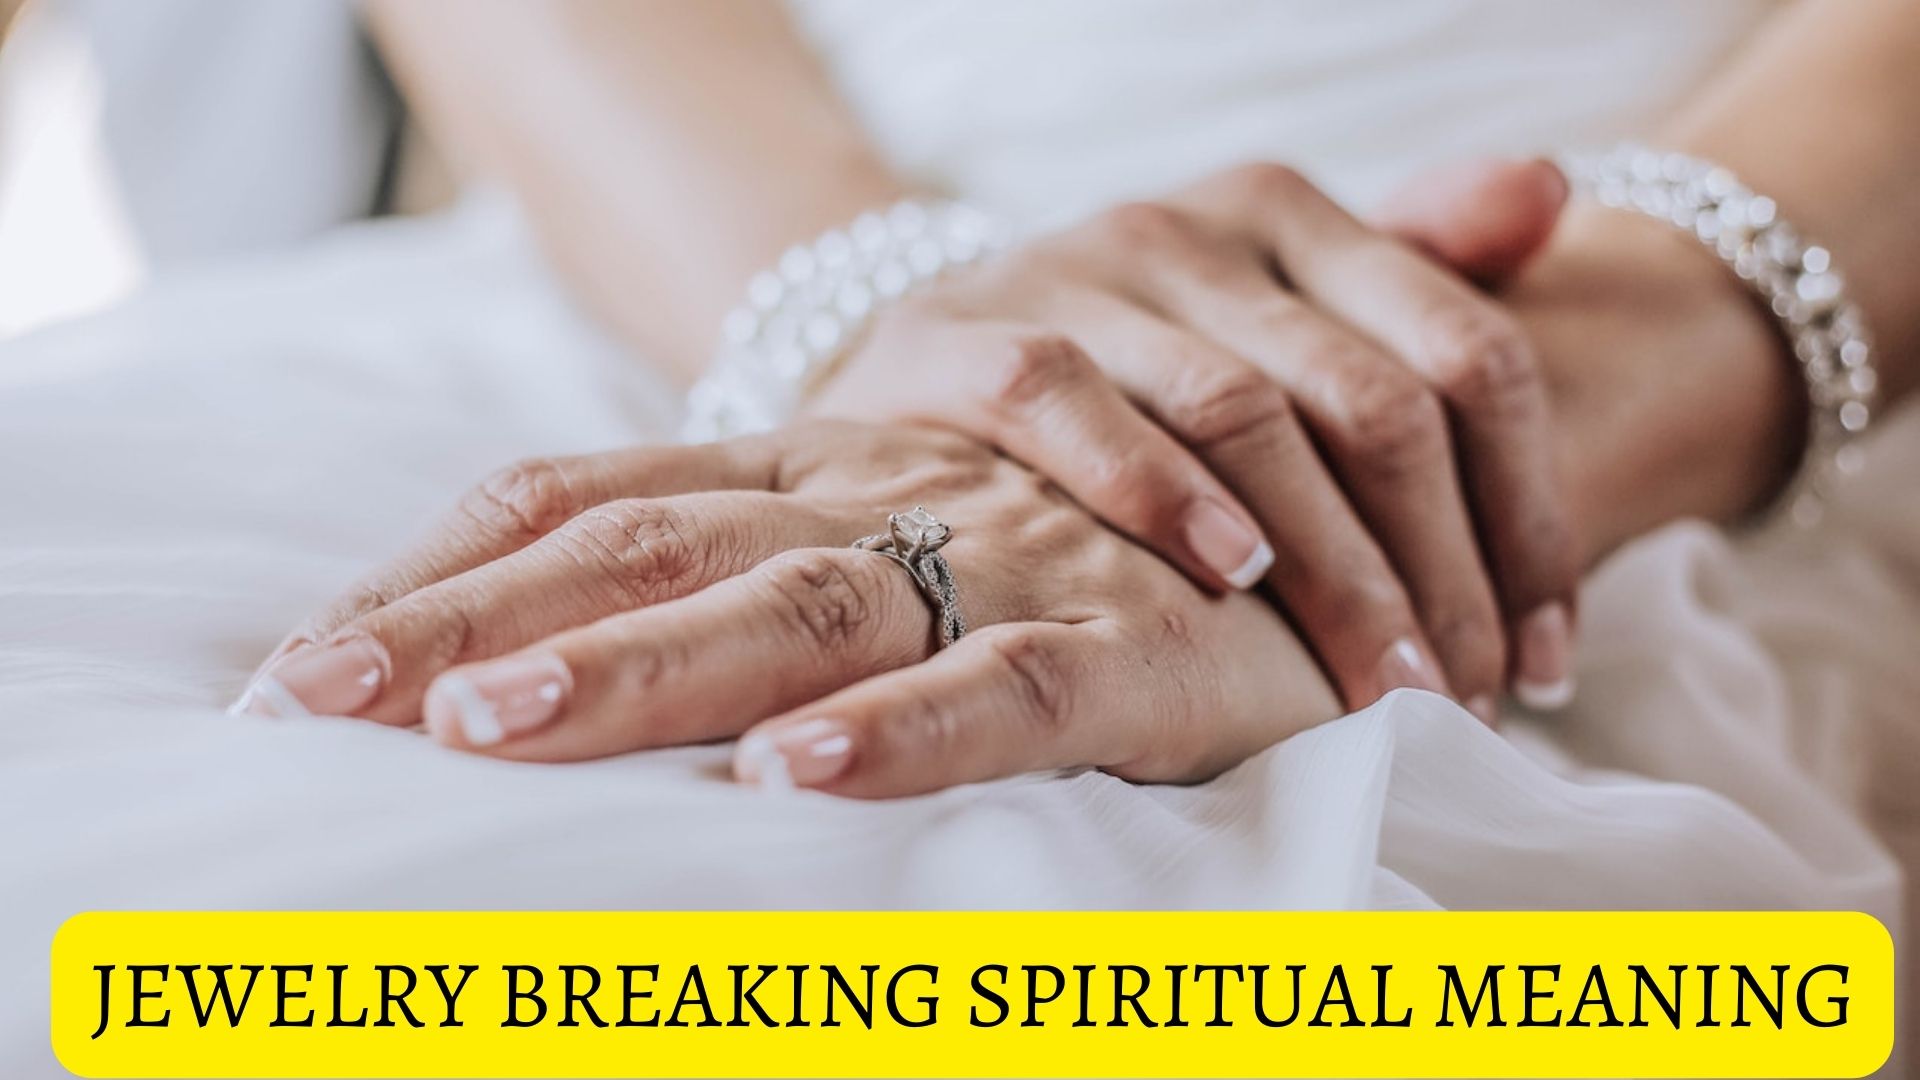 Jewelry Breaking Spiritual Meaning - It's Time To Let Go